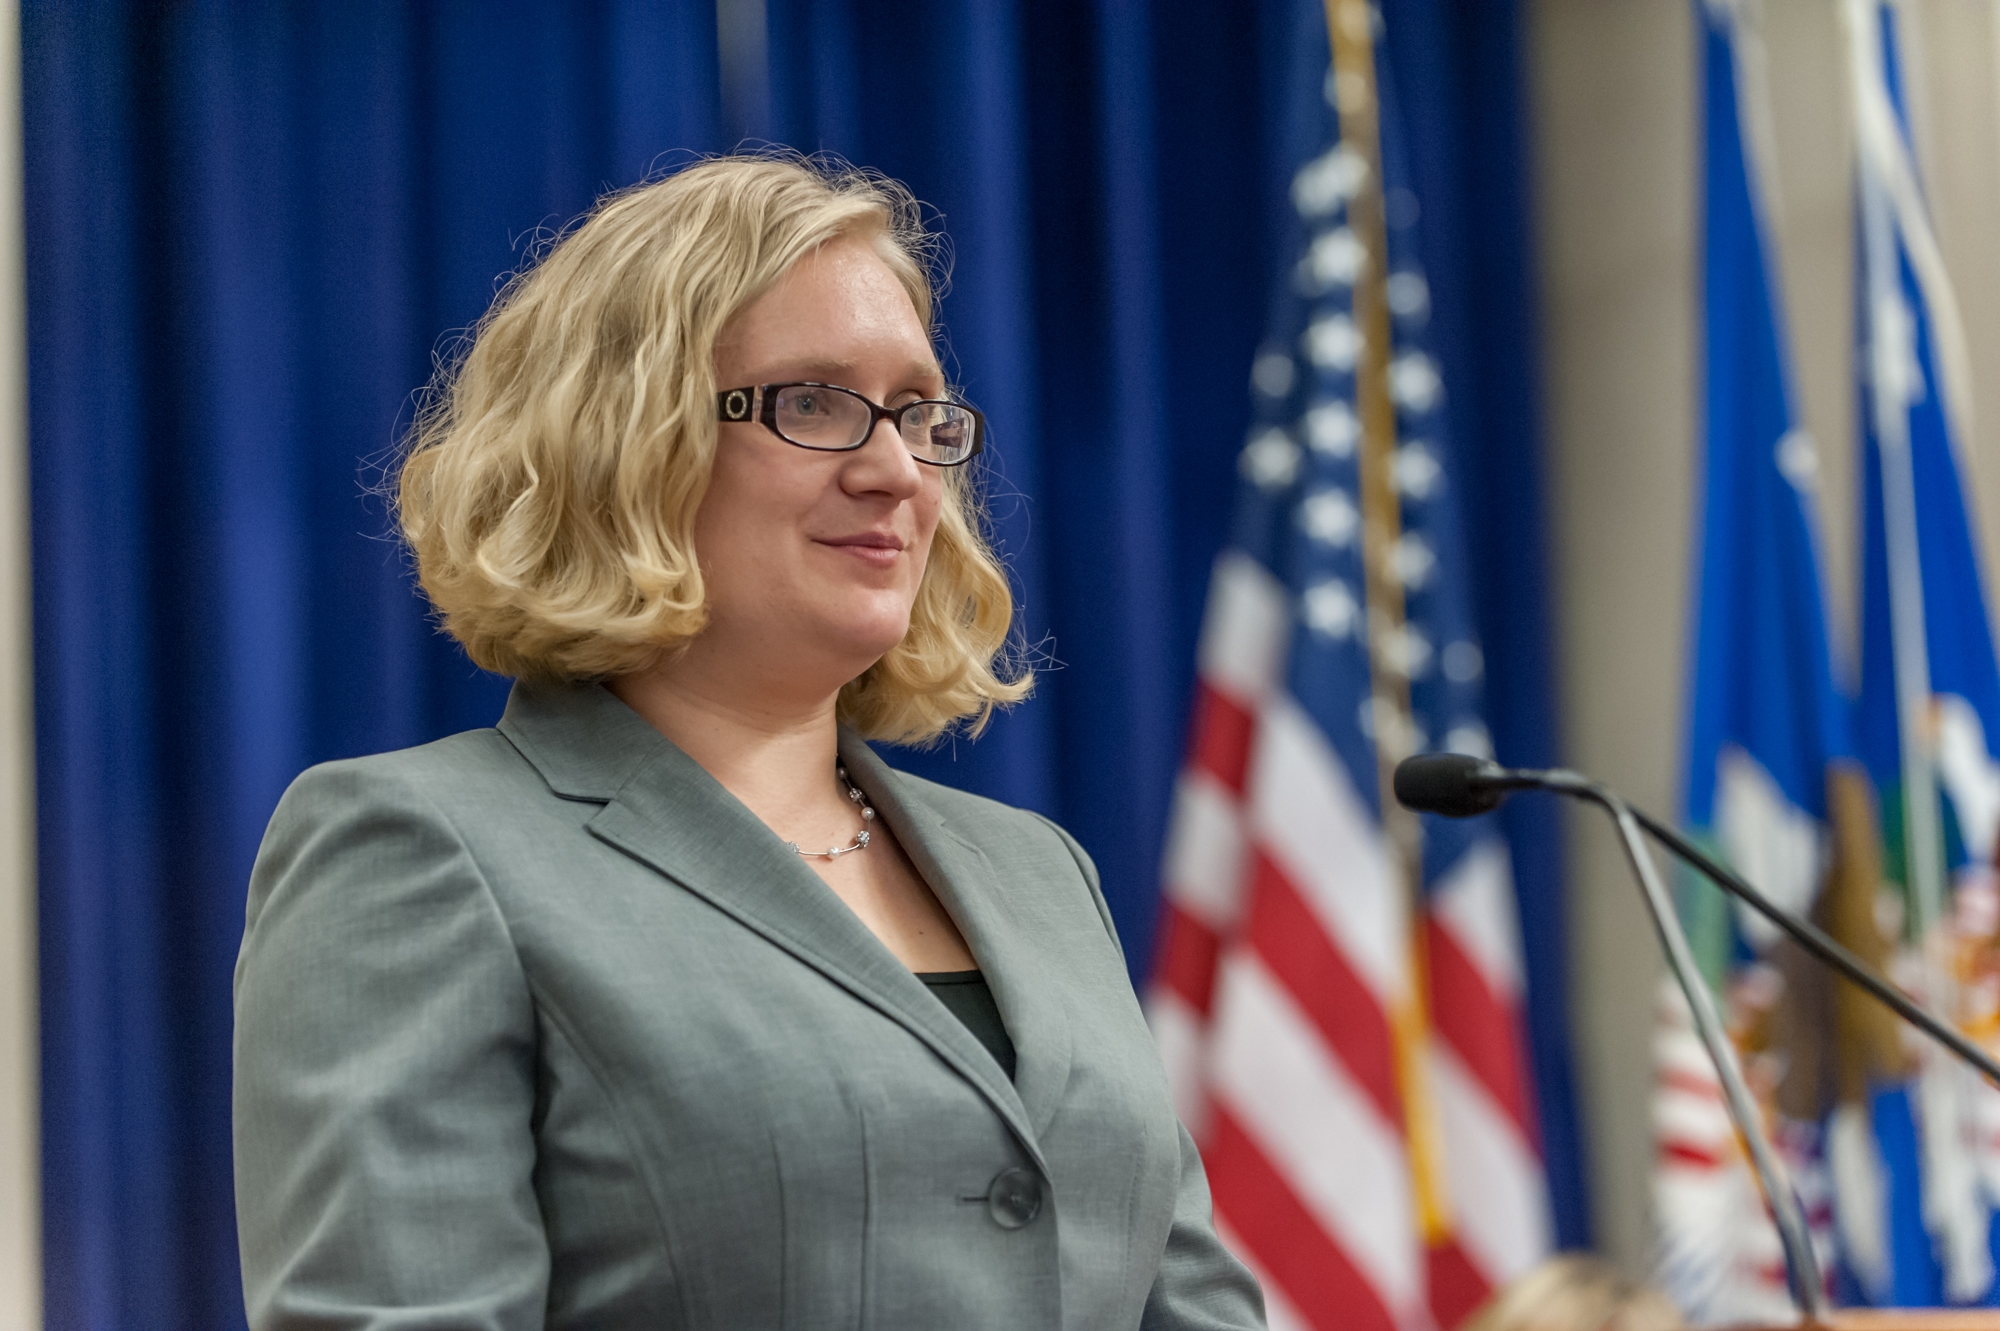 Denise A. Walker, Attorney Advisor in the General Counsel for Natural Resources at the Department of Commerce's National Oceanic and Atmospheric Administration addresses how NOAA has created a process for making proactive disclosures of records.